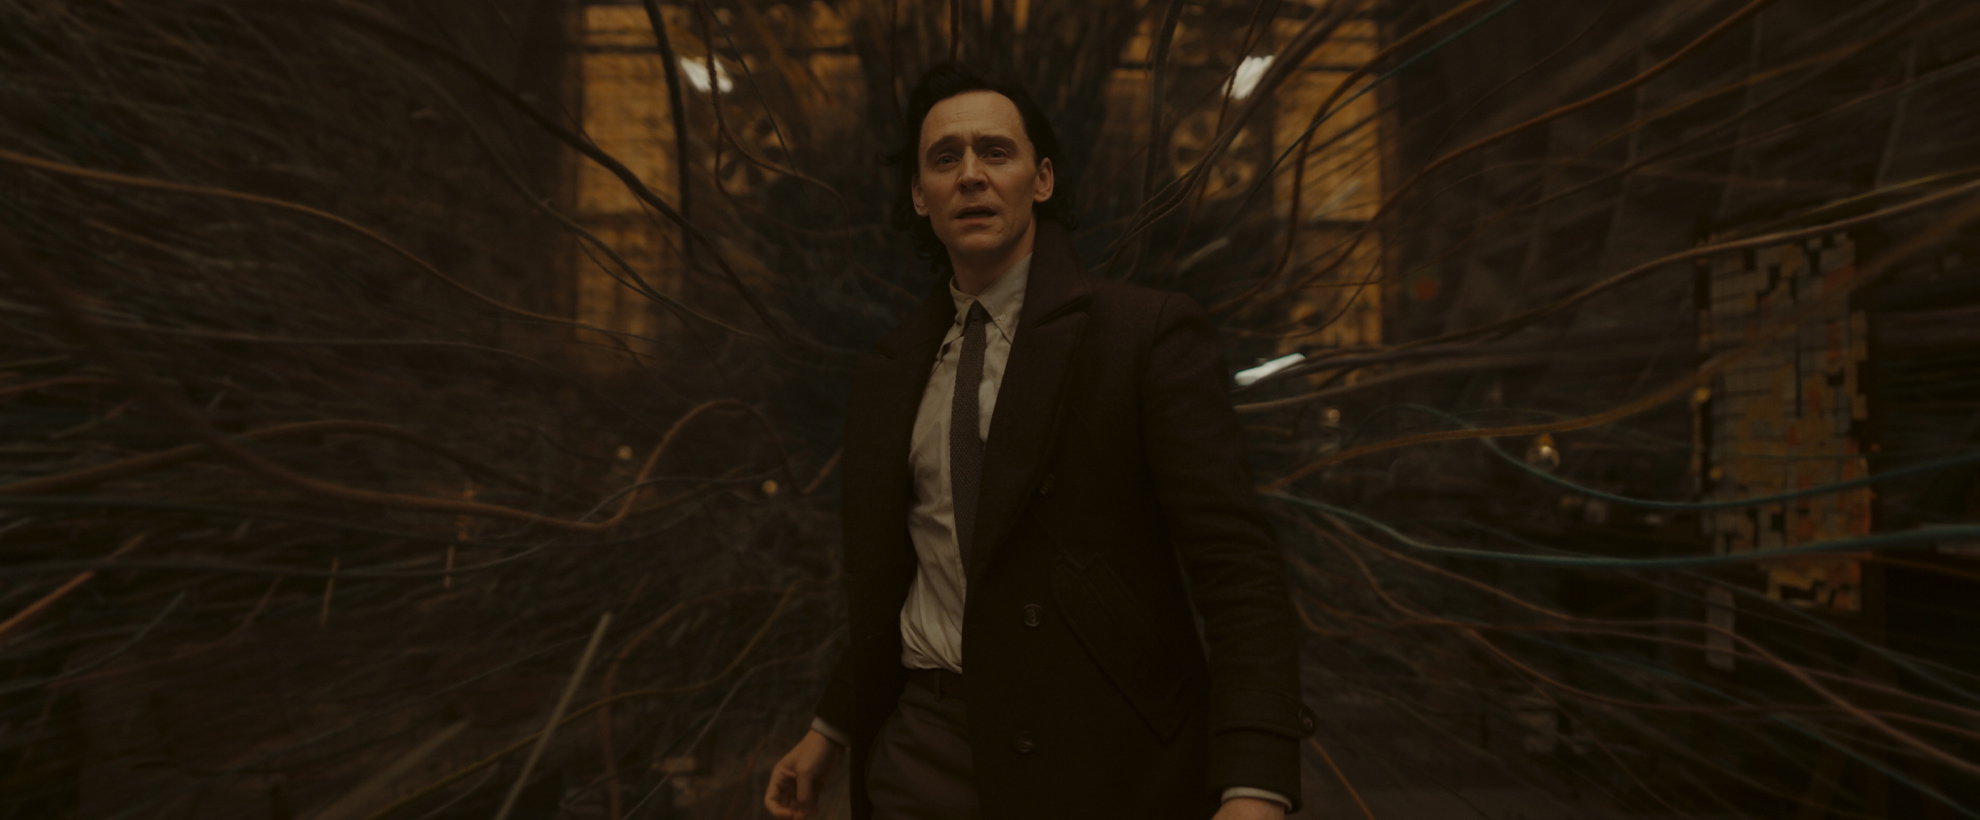 Loki stands in a room as it spaghettifies around him